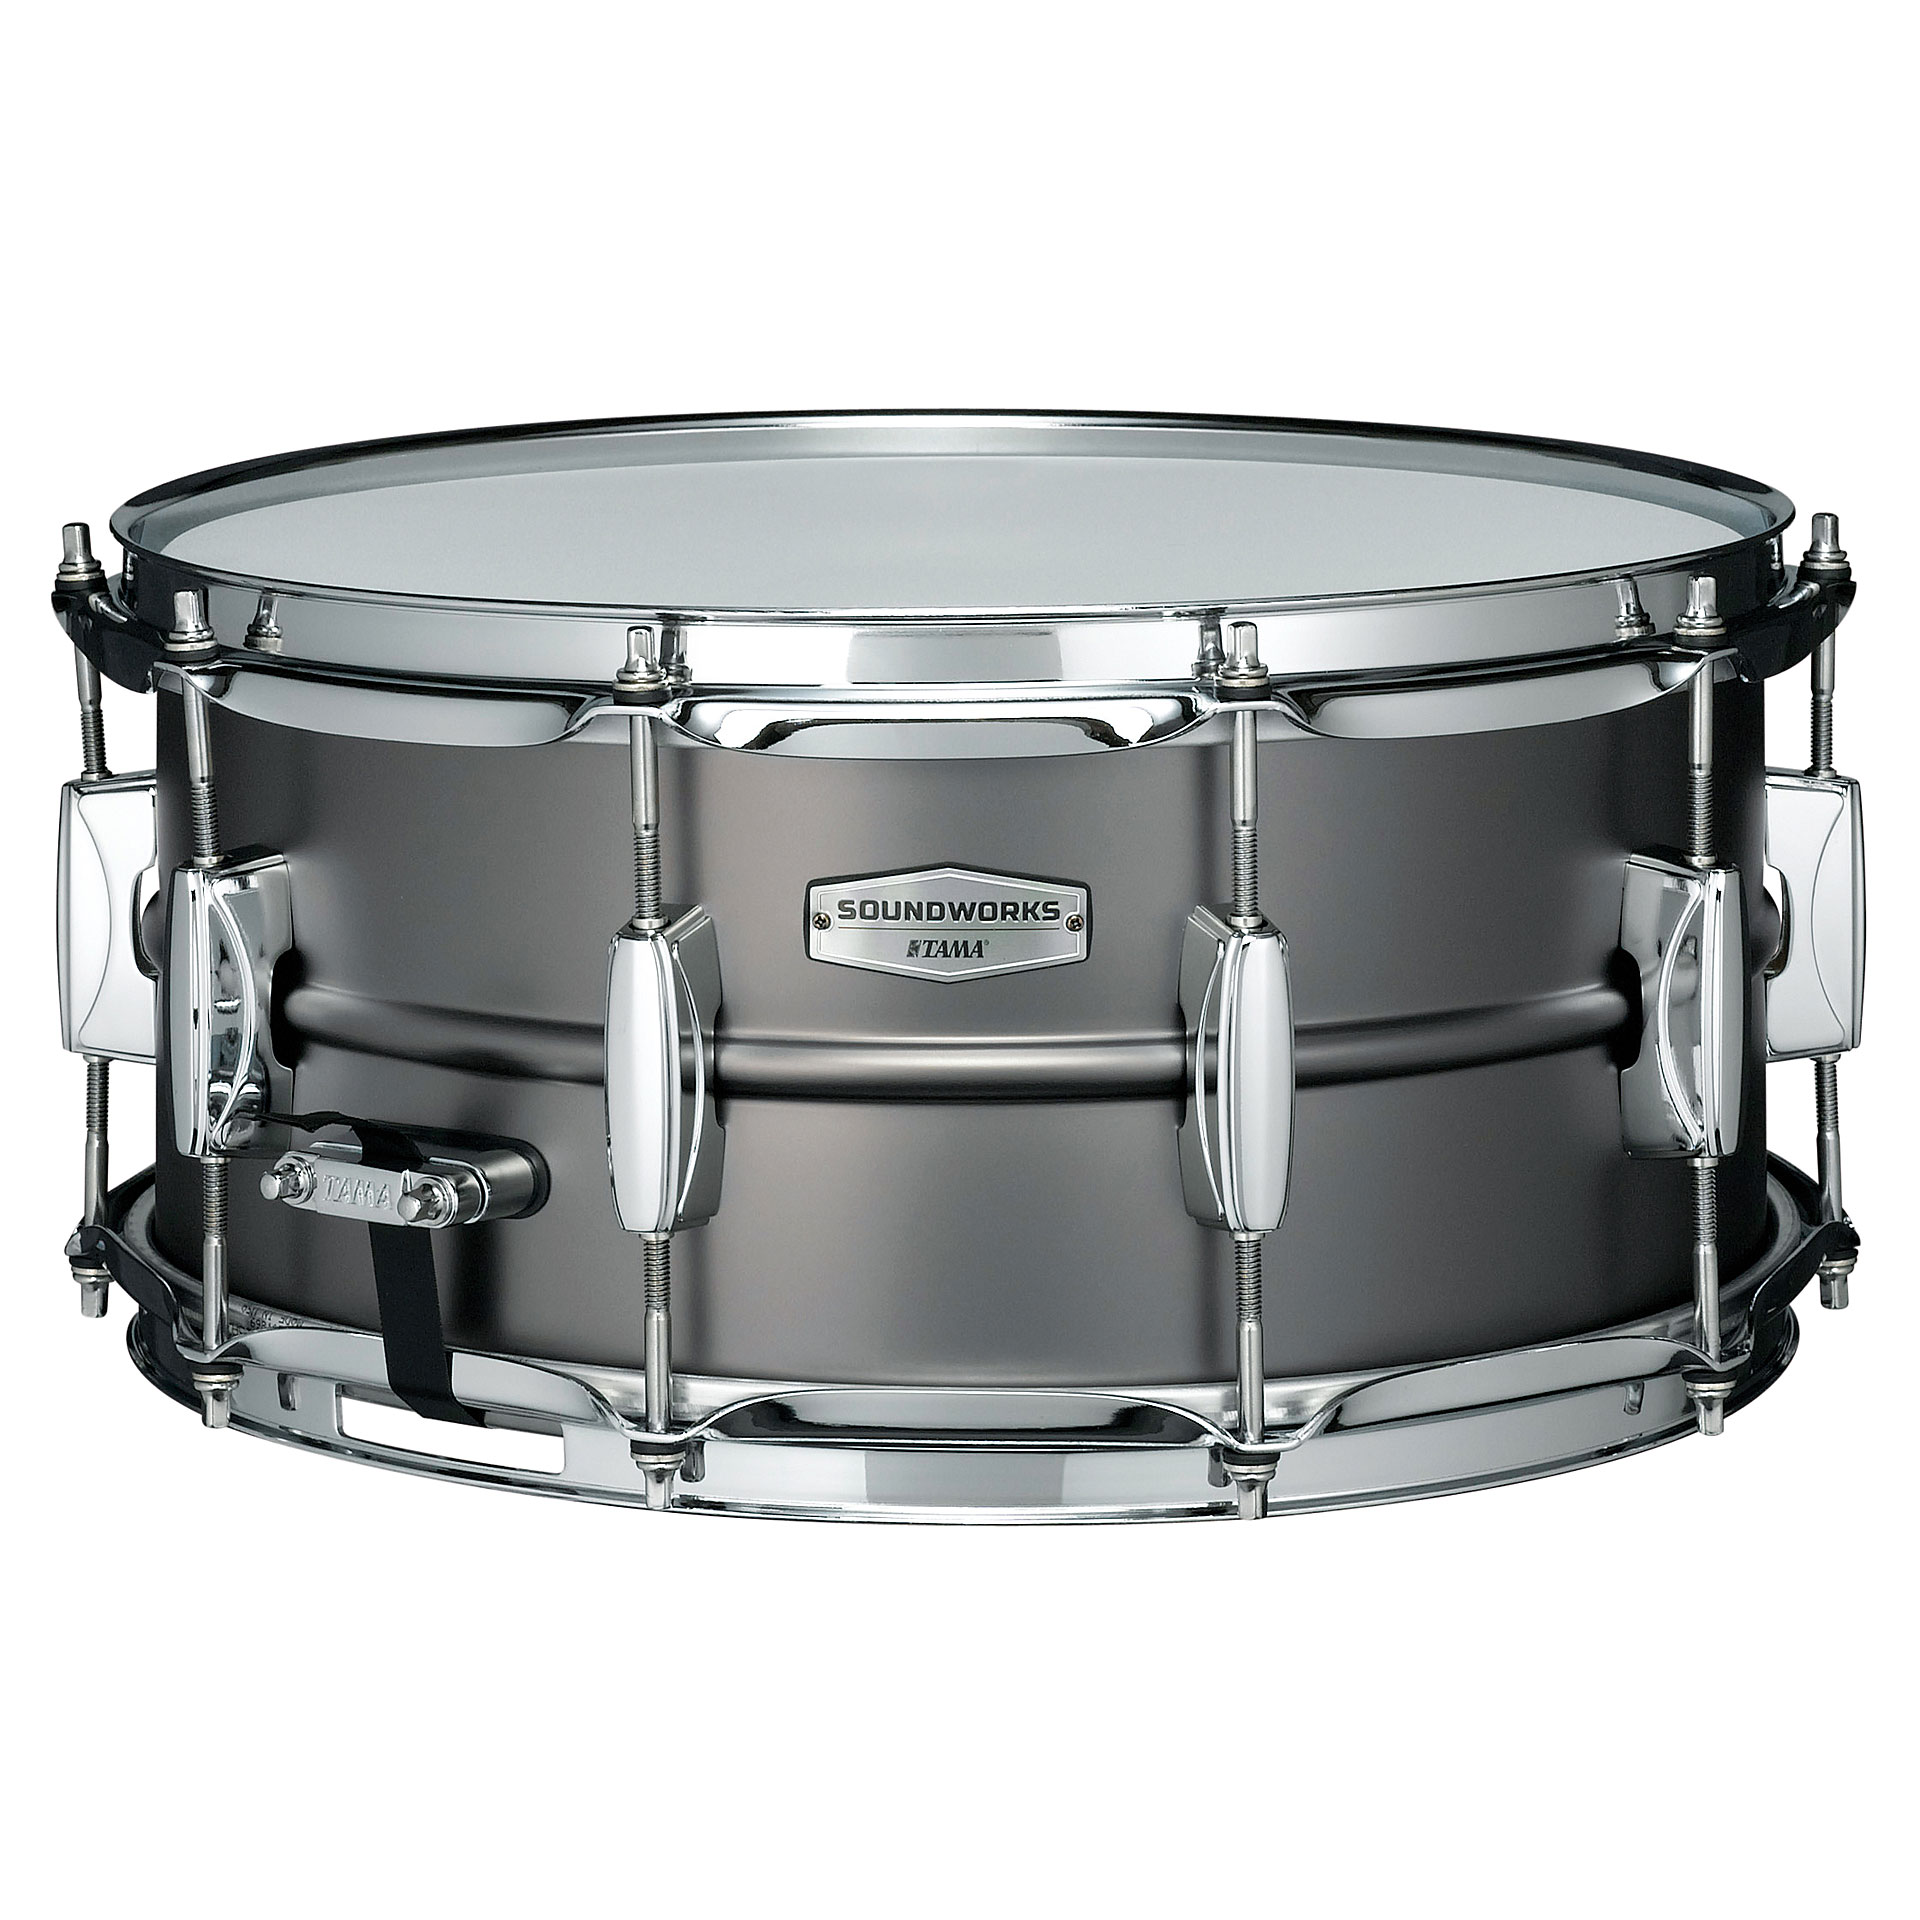 Tama DST1465 Soundworks Steel Snare Drum in India